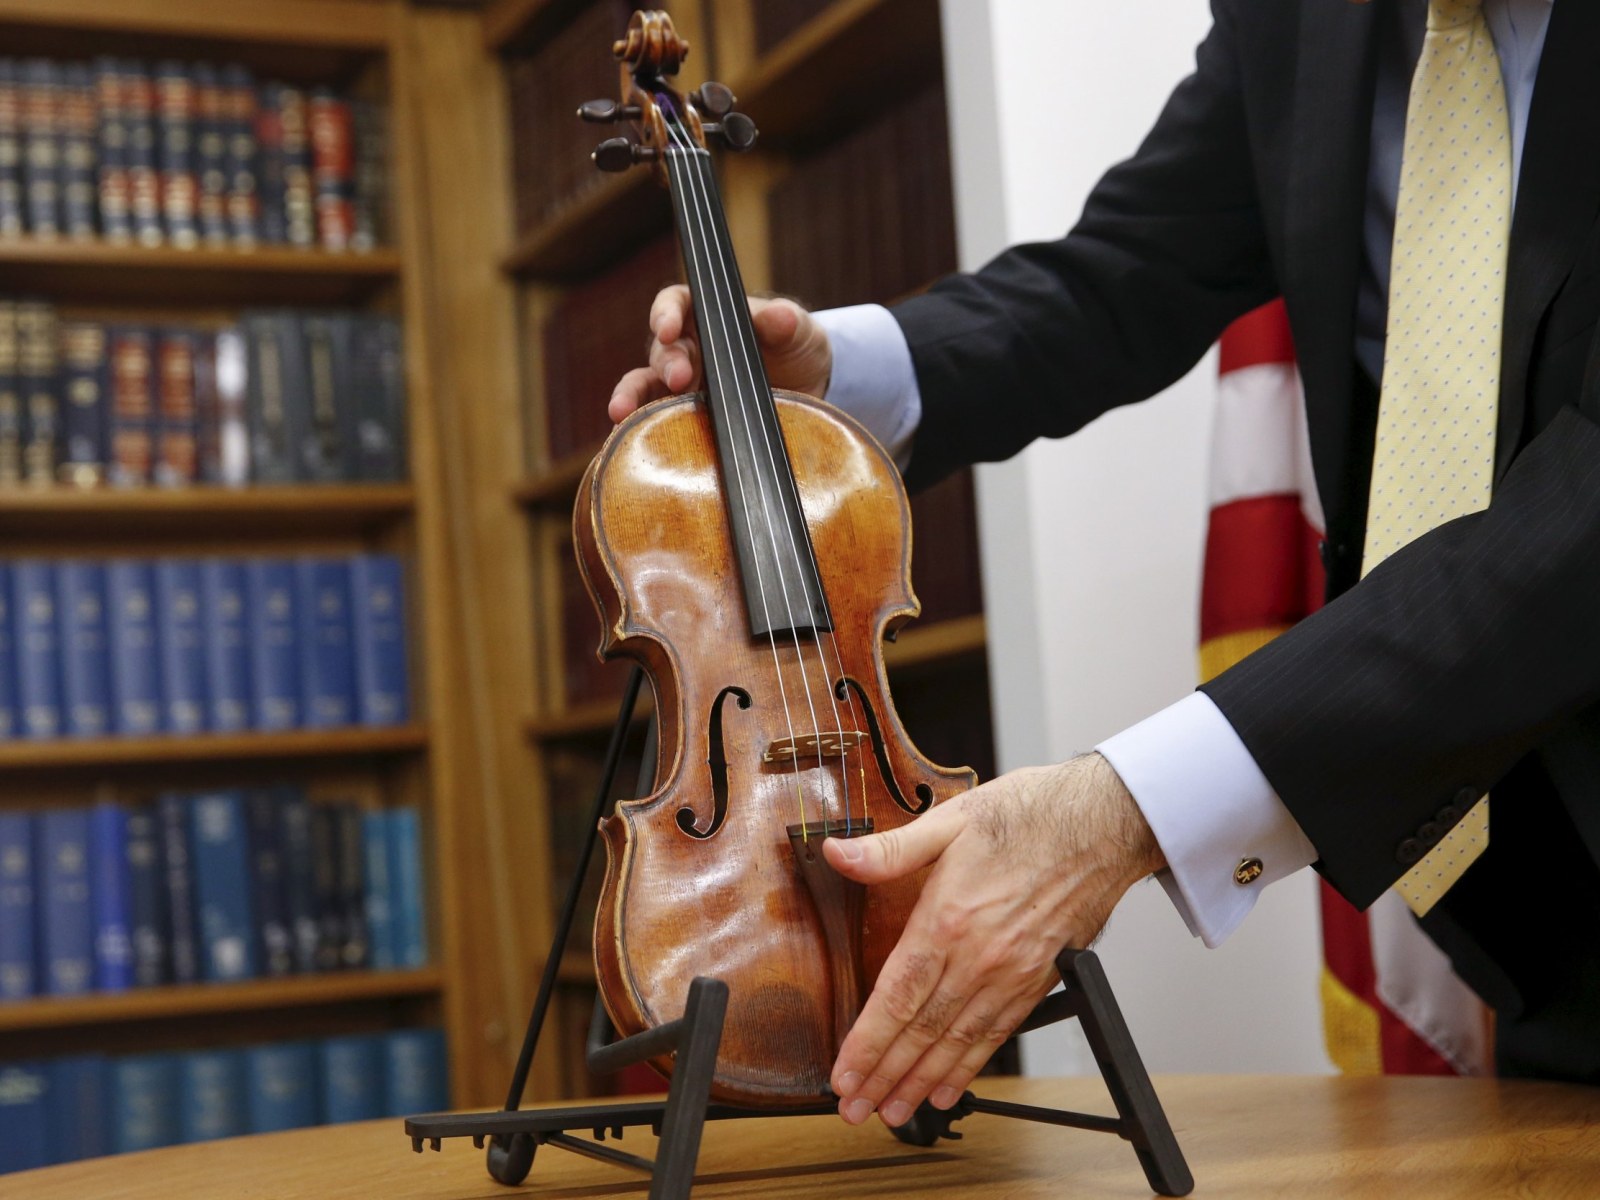 For Stradivarius Violin Discovered, There Many Wannabes, Fakes